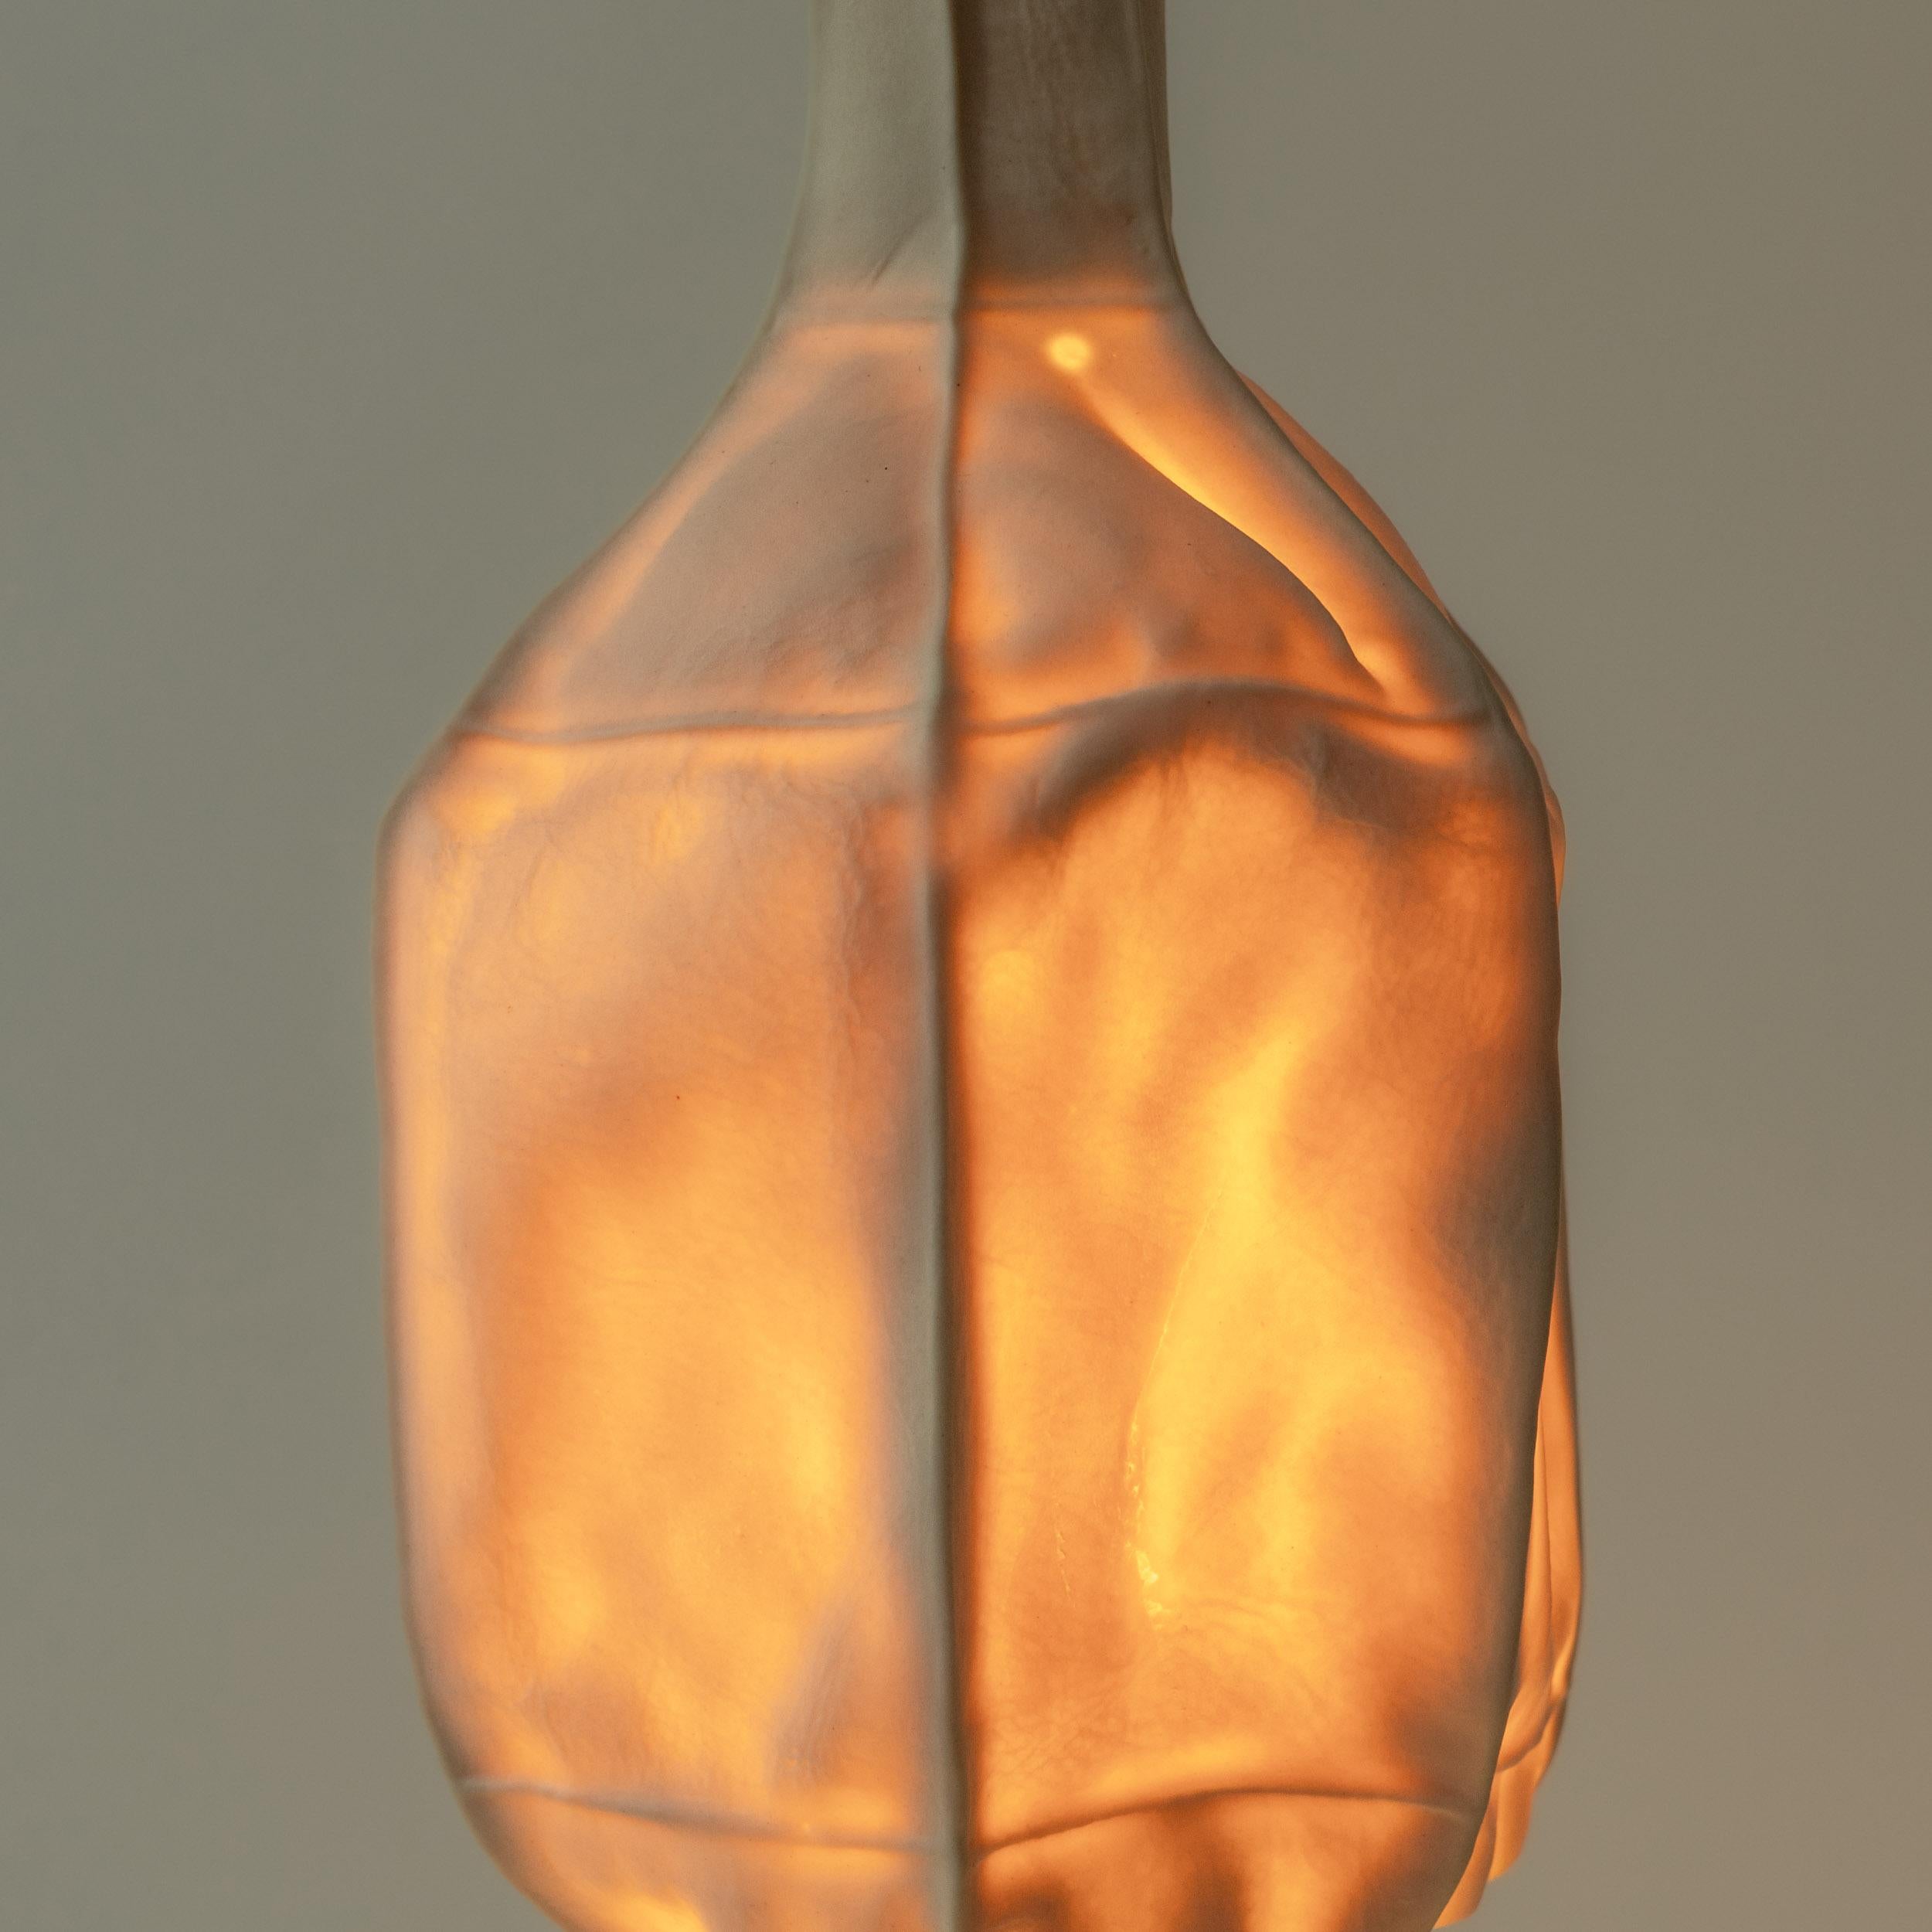 Hand-Crafted Kawa Series Leather-cast porcelain pendant light, white translucent ceramic For Sale